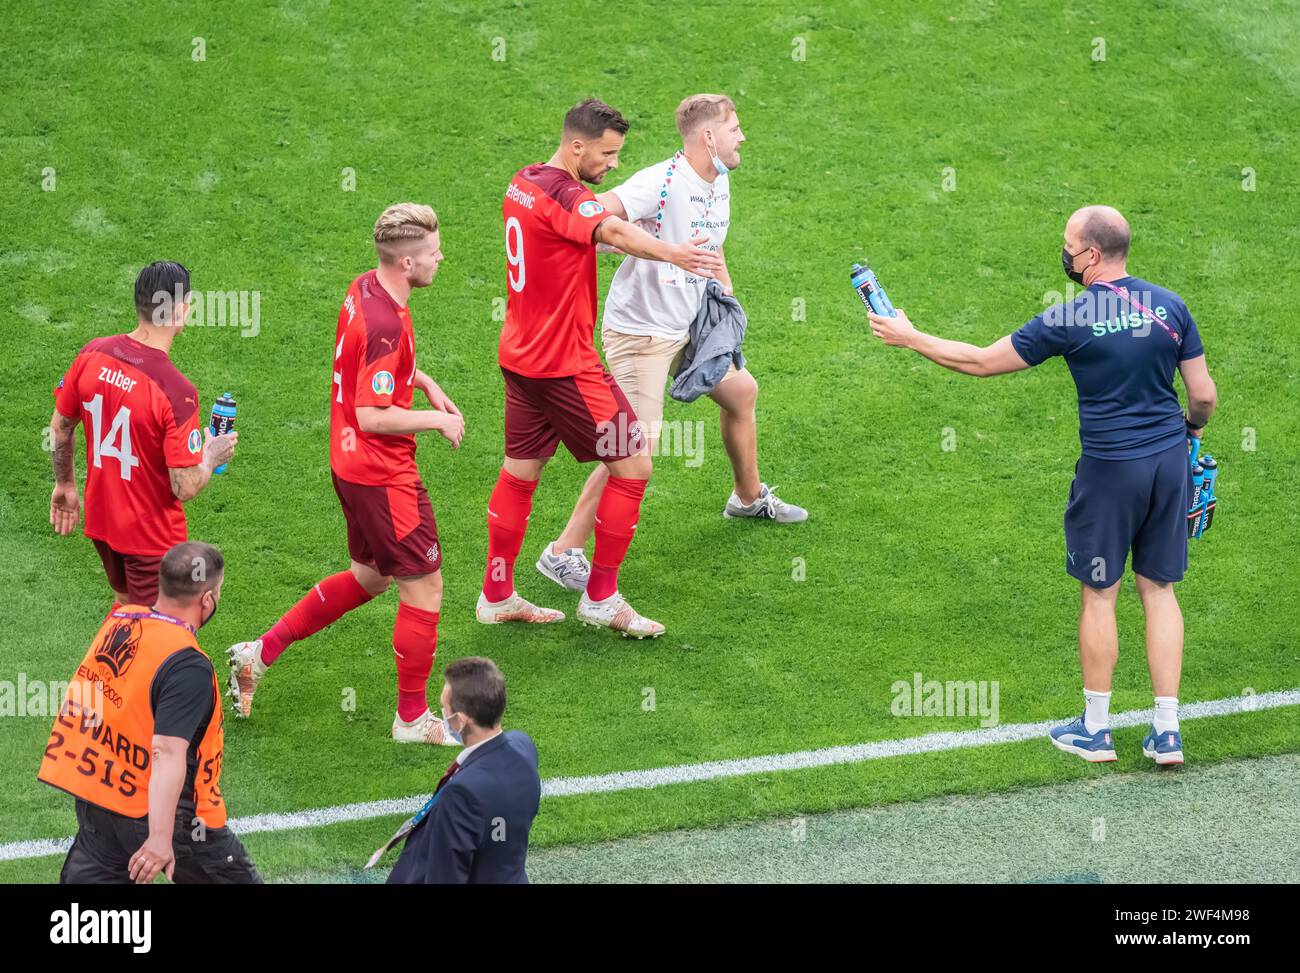 Saint Petersburg, Russia – July 2, 2021. Switzerland players Steven Zuber, Nico Elvedi and Haris Seferovic escoring a pitch invader from the pitch dur Stock Photo